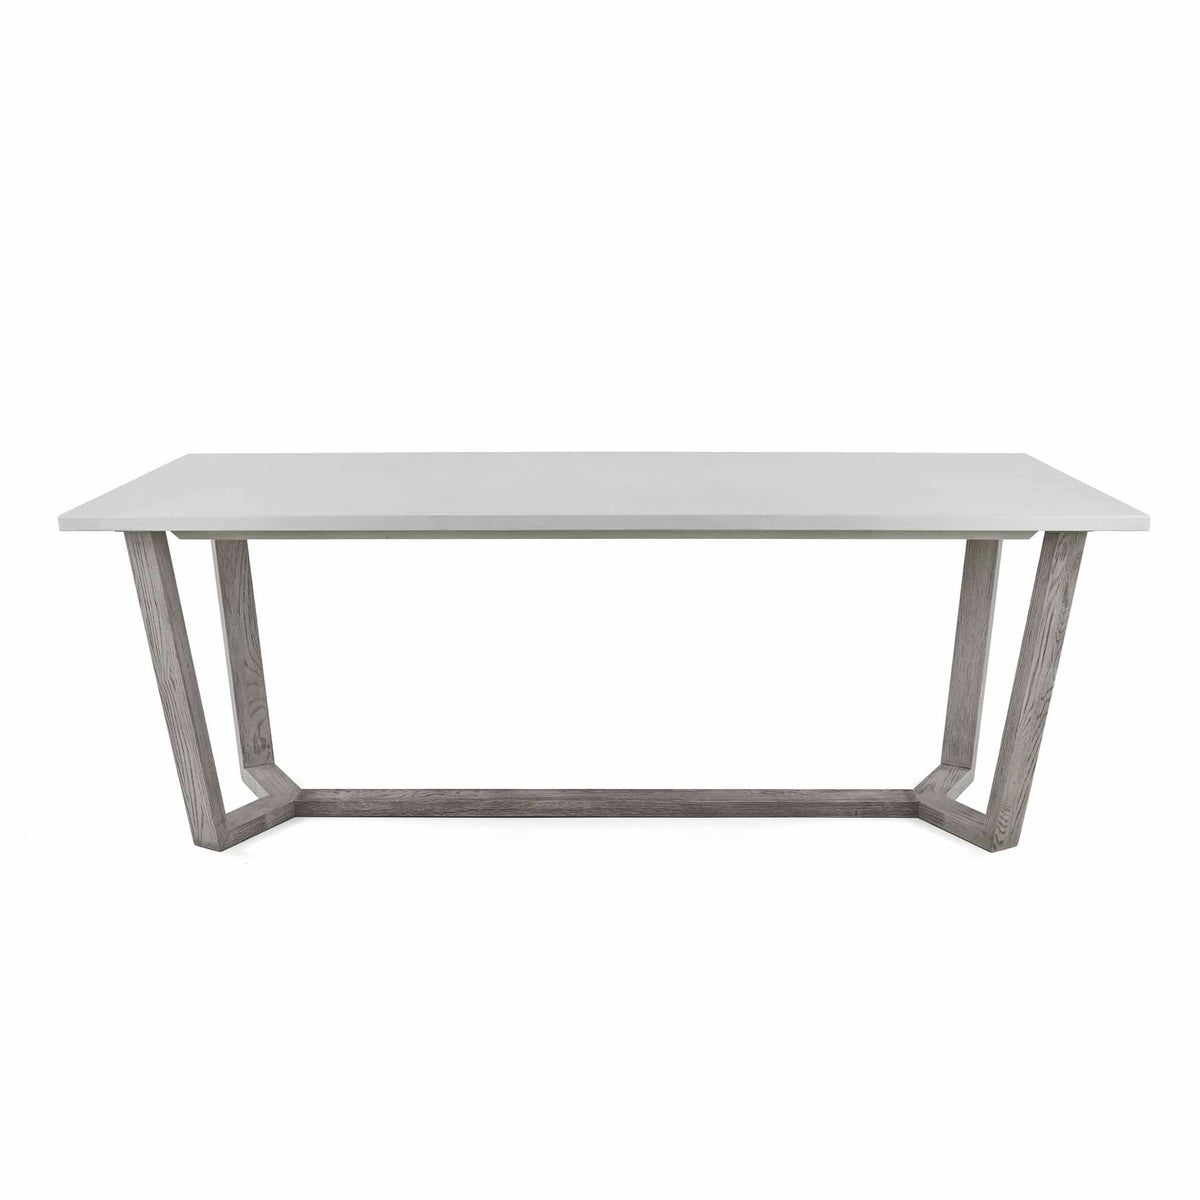 front view of the Epsom 210cm Rectangular Dining Table